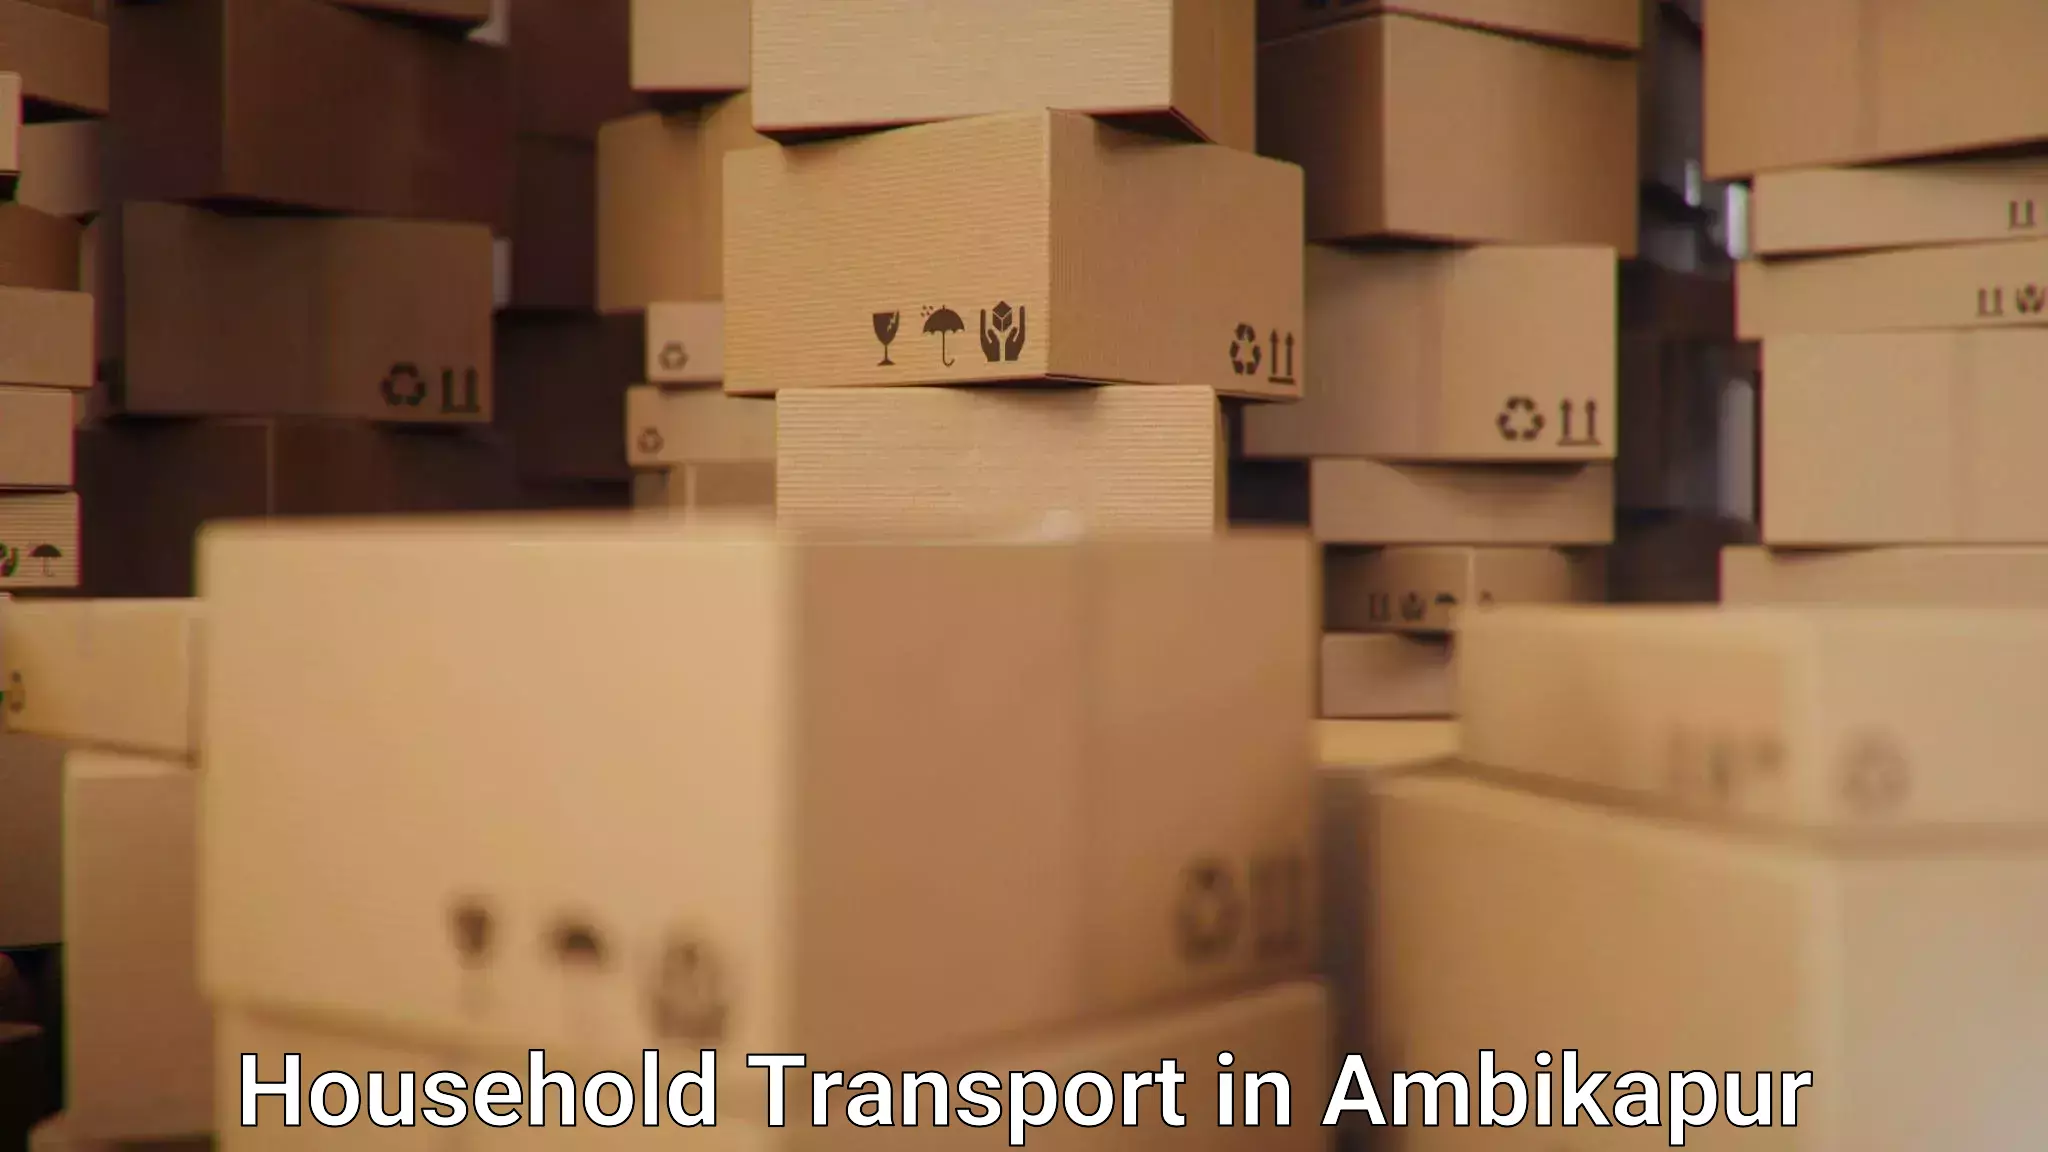 Trusted relocation experts in Ambikapur